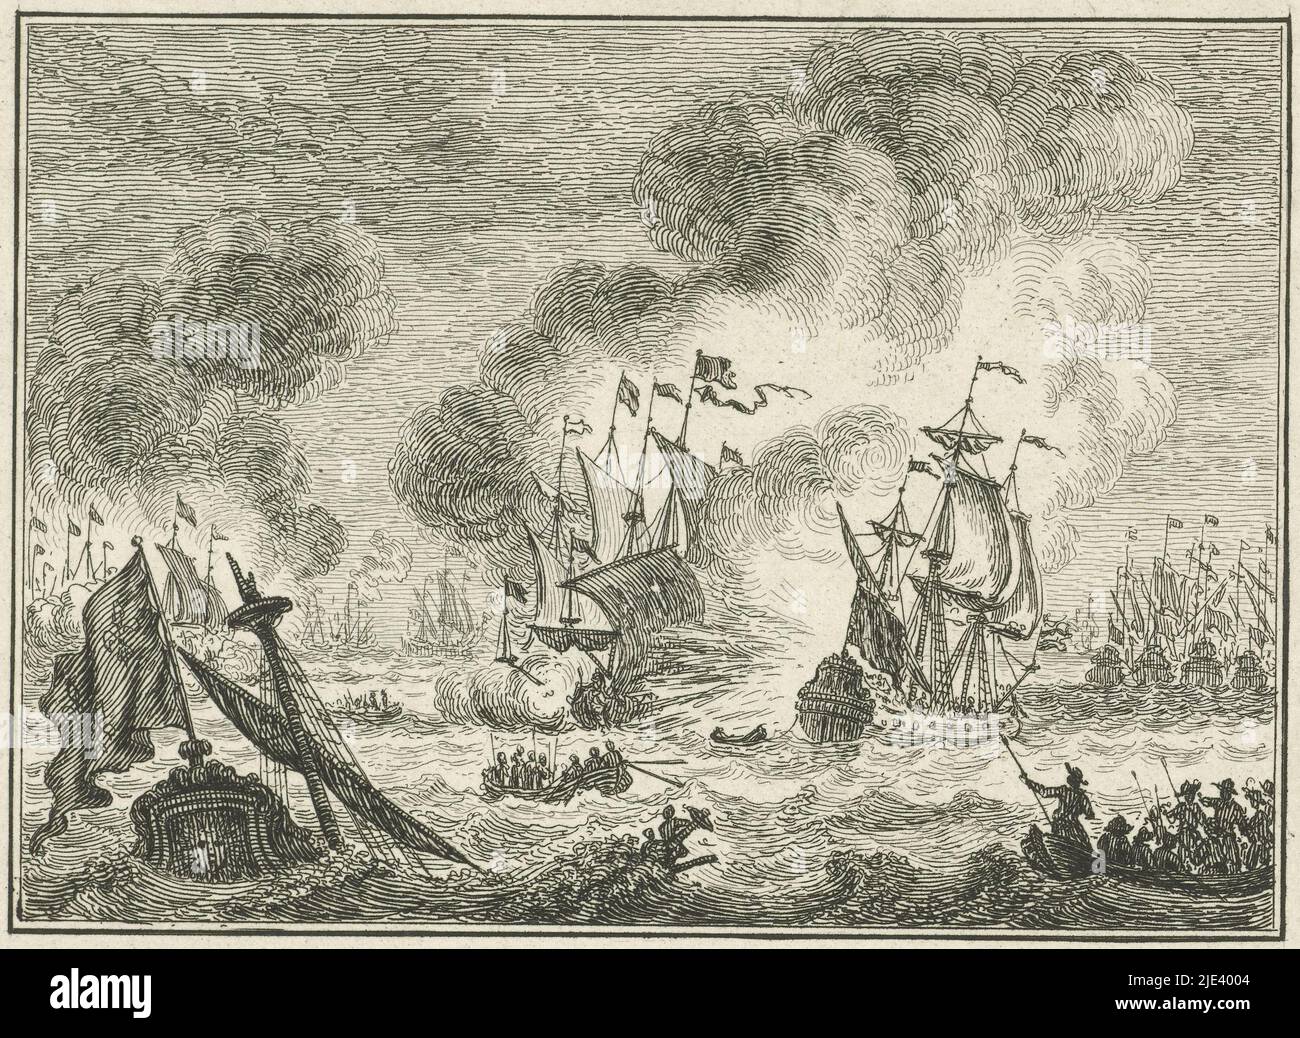 Sea battle with sinking ships, Simon Fokke, 1722 - 1784, Representation from the national history. View of a sea battle with a sinking sailing ship and a rowing boat with crew in the foreground. In the distance are more sailing ships, some of which are on fire and surrounded by clouds of smoke., print maker: Simon Fokke, Amsterdam, 1722 - 1784, paper, etching, h 90 mm × w 109 mm Stock Photo